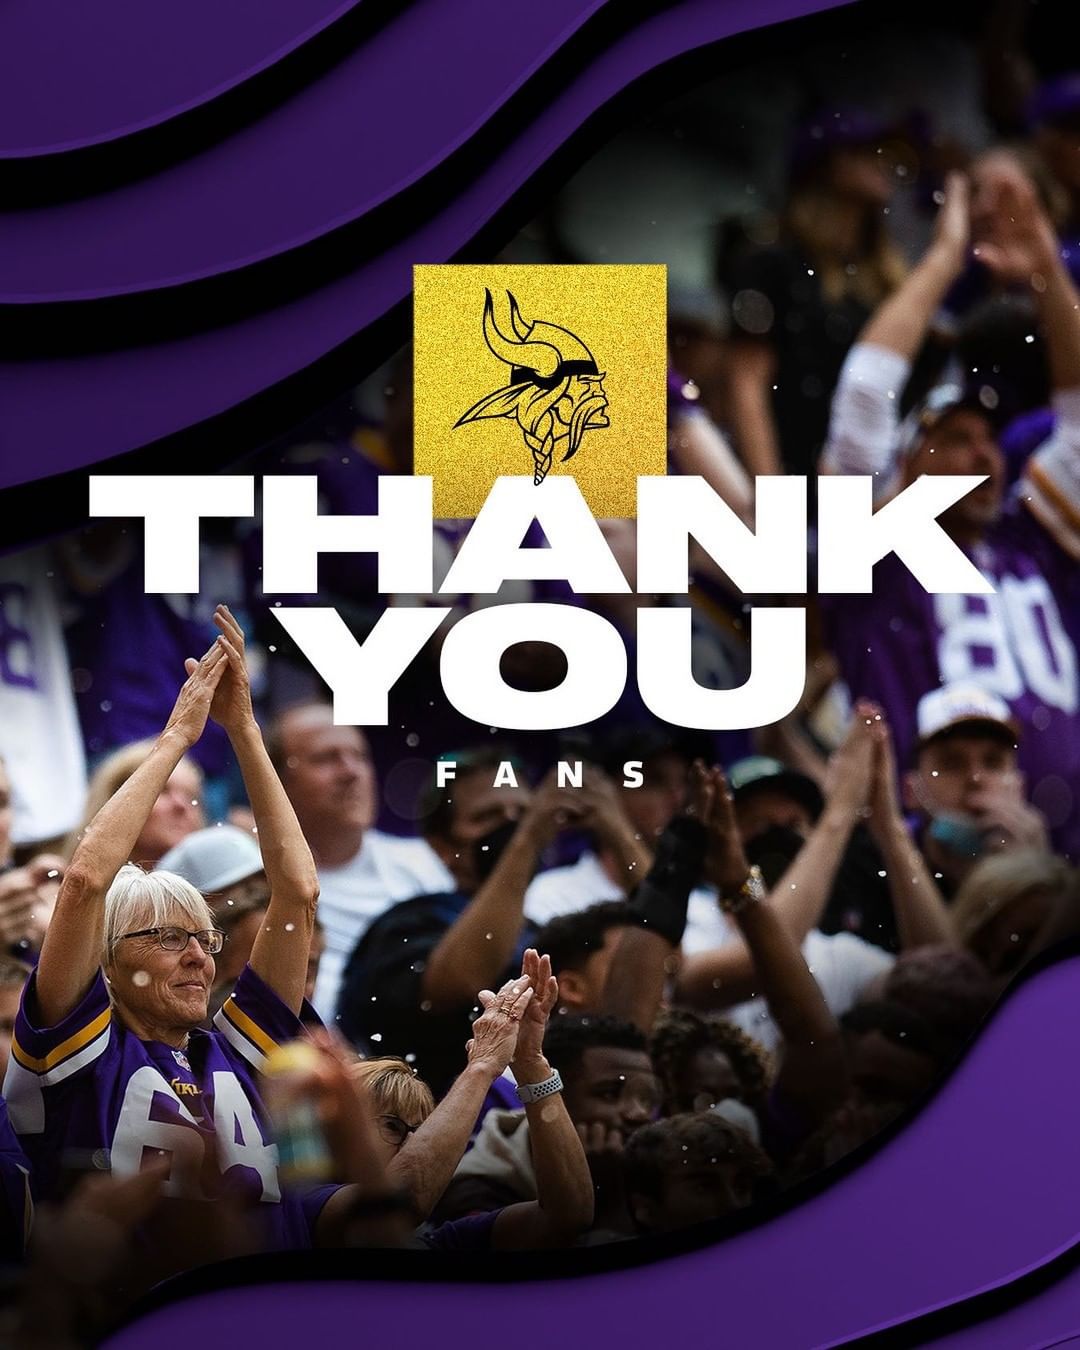 As always, your support is greatly appreciated. Thank you #Vikings fans!...